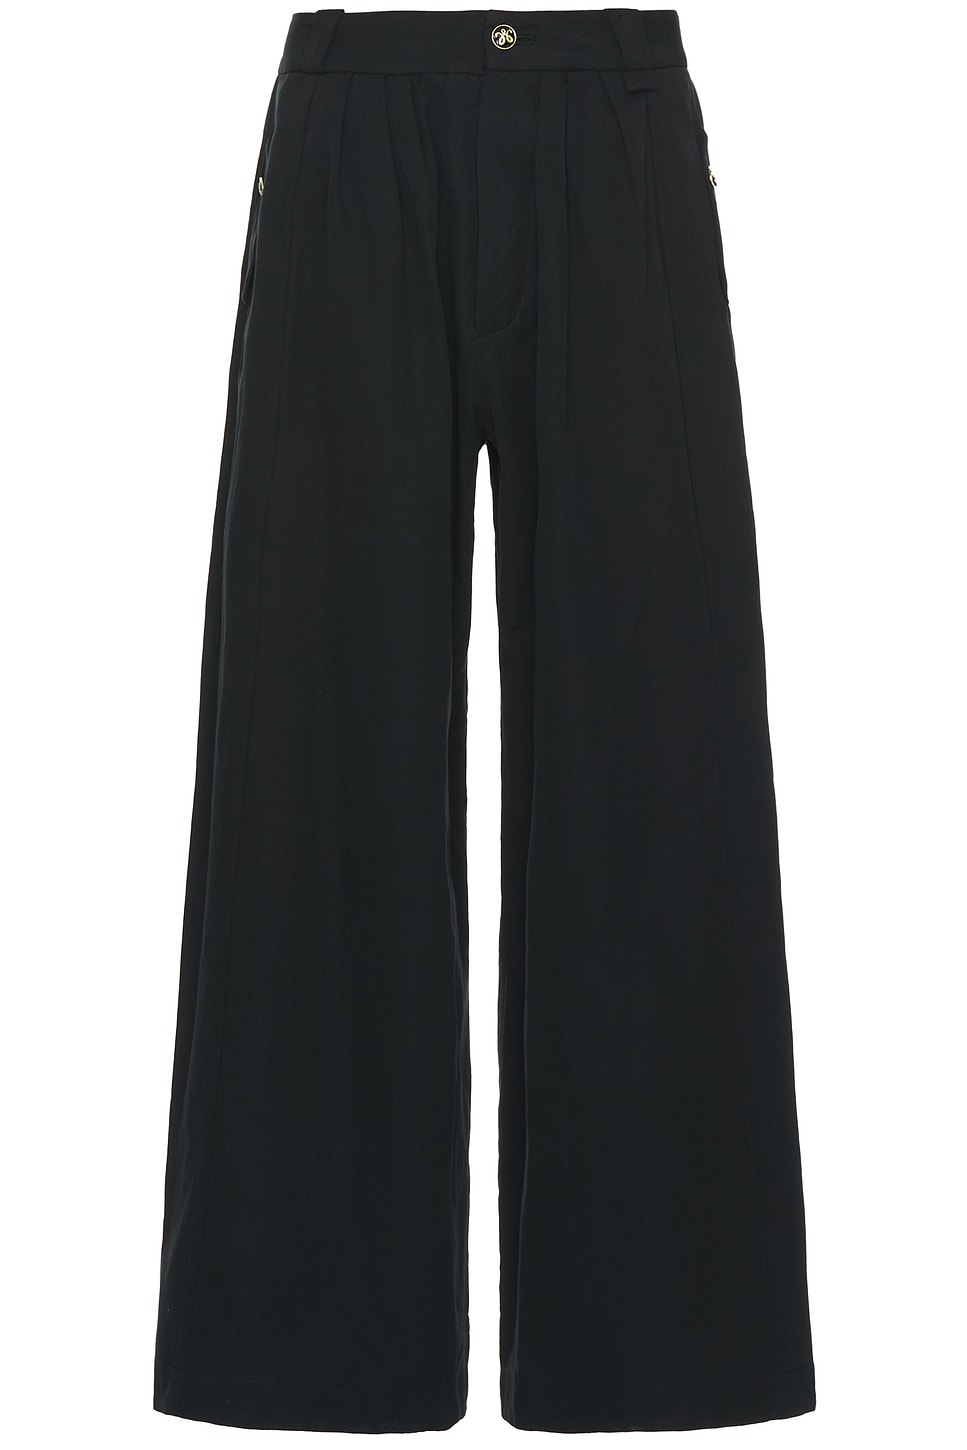 Mudflaps Trousers in Black